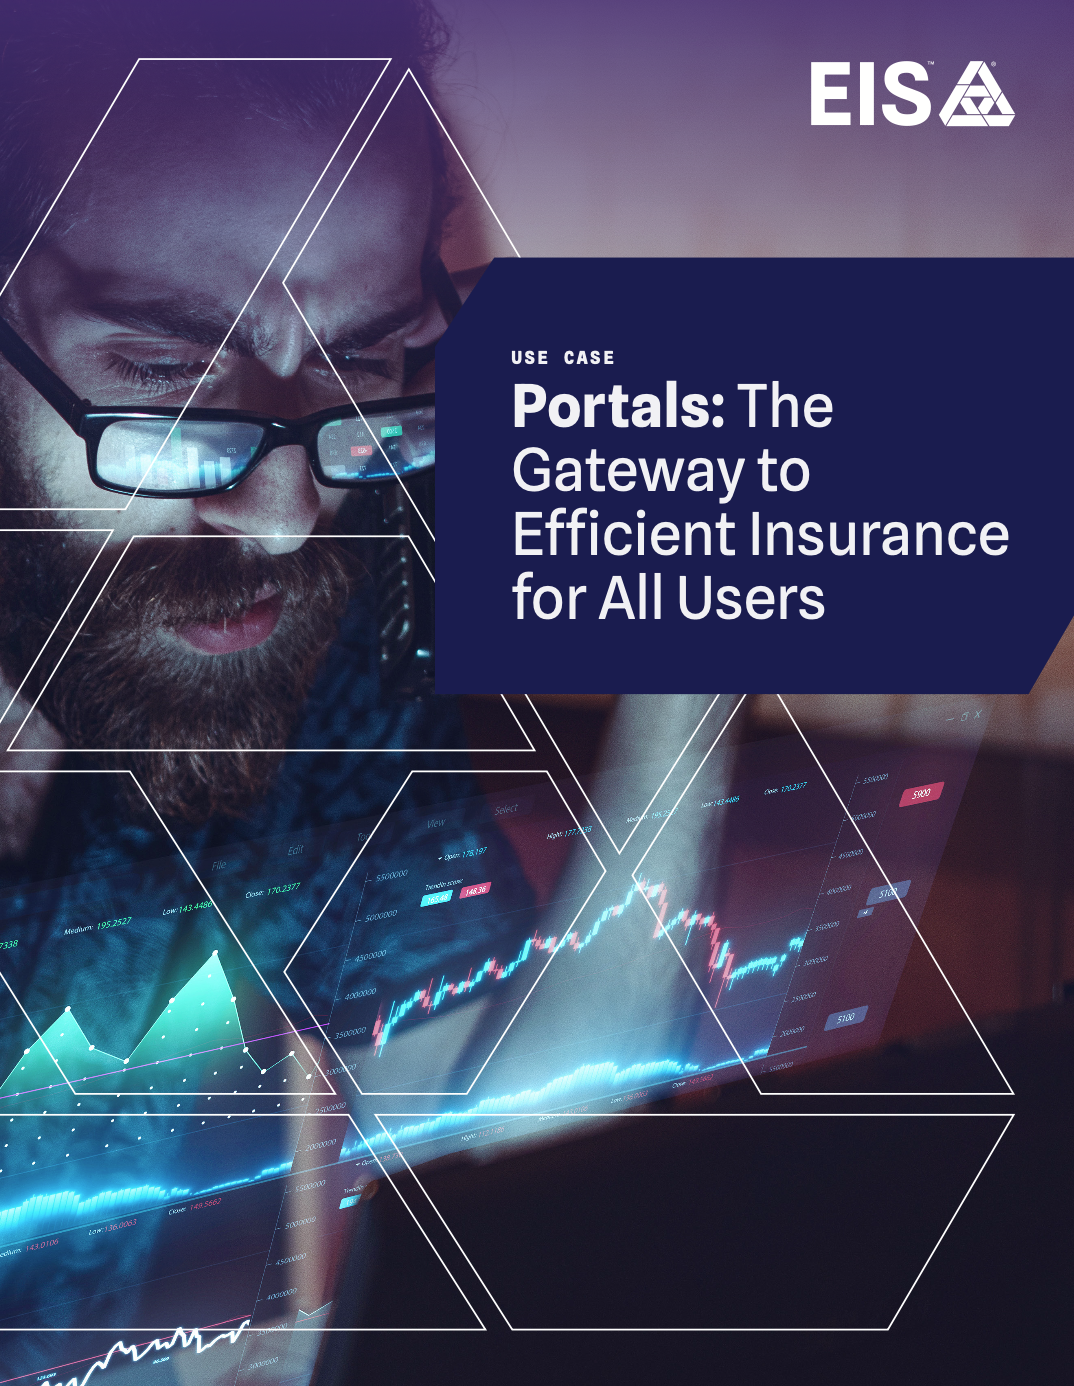 Portals: The Gateway to Efficient Insurance for All Users